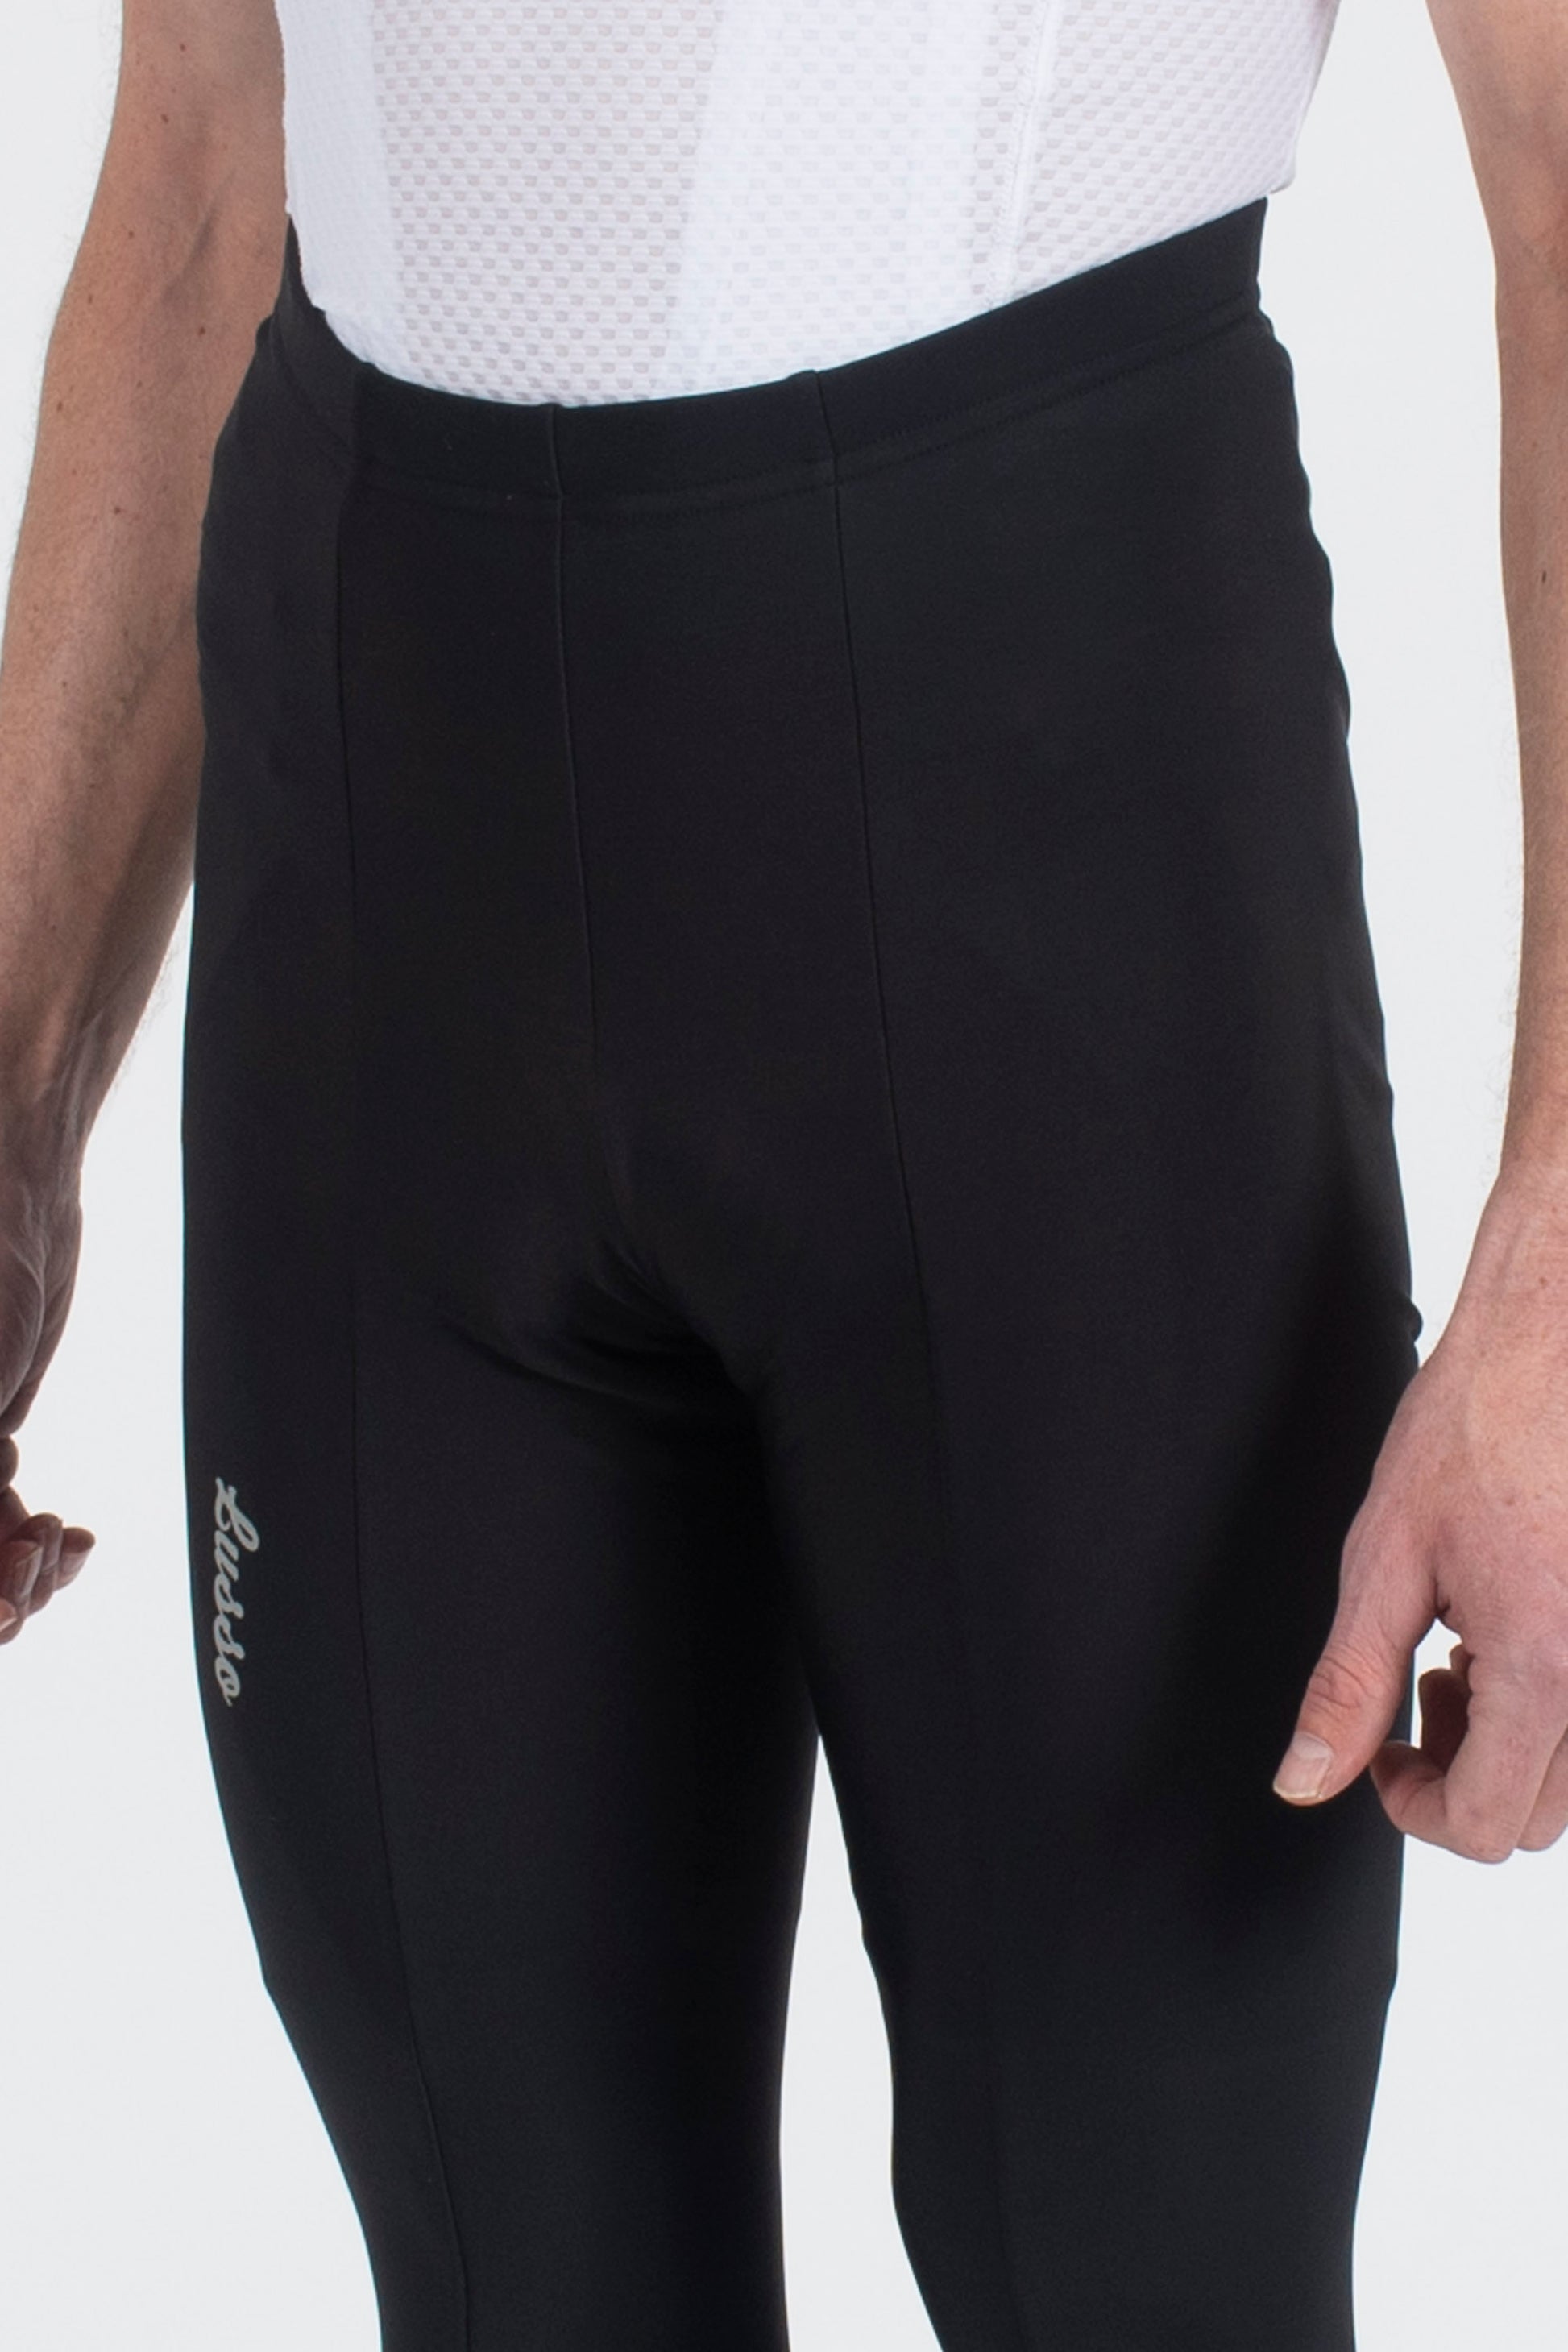 Cooltech Tights - Lusso Cycle Wear